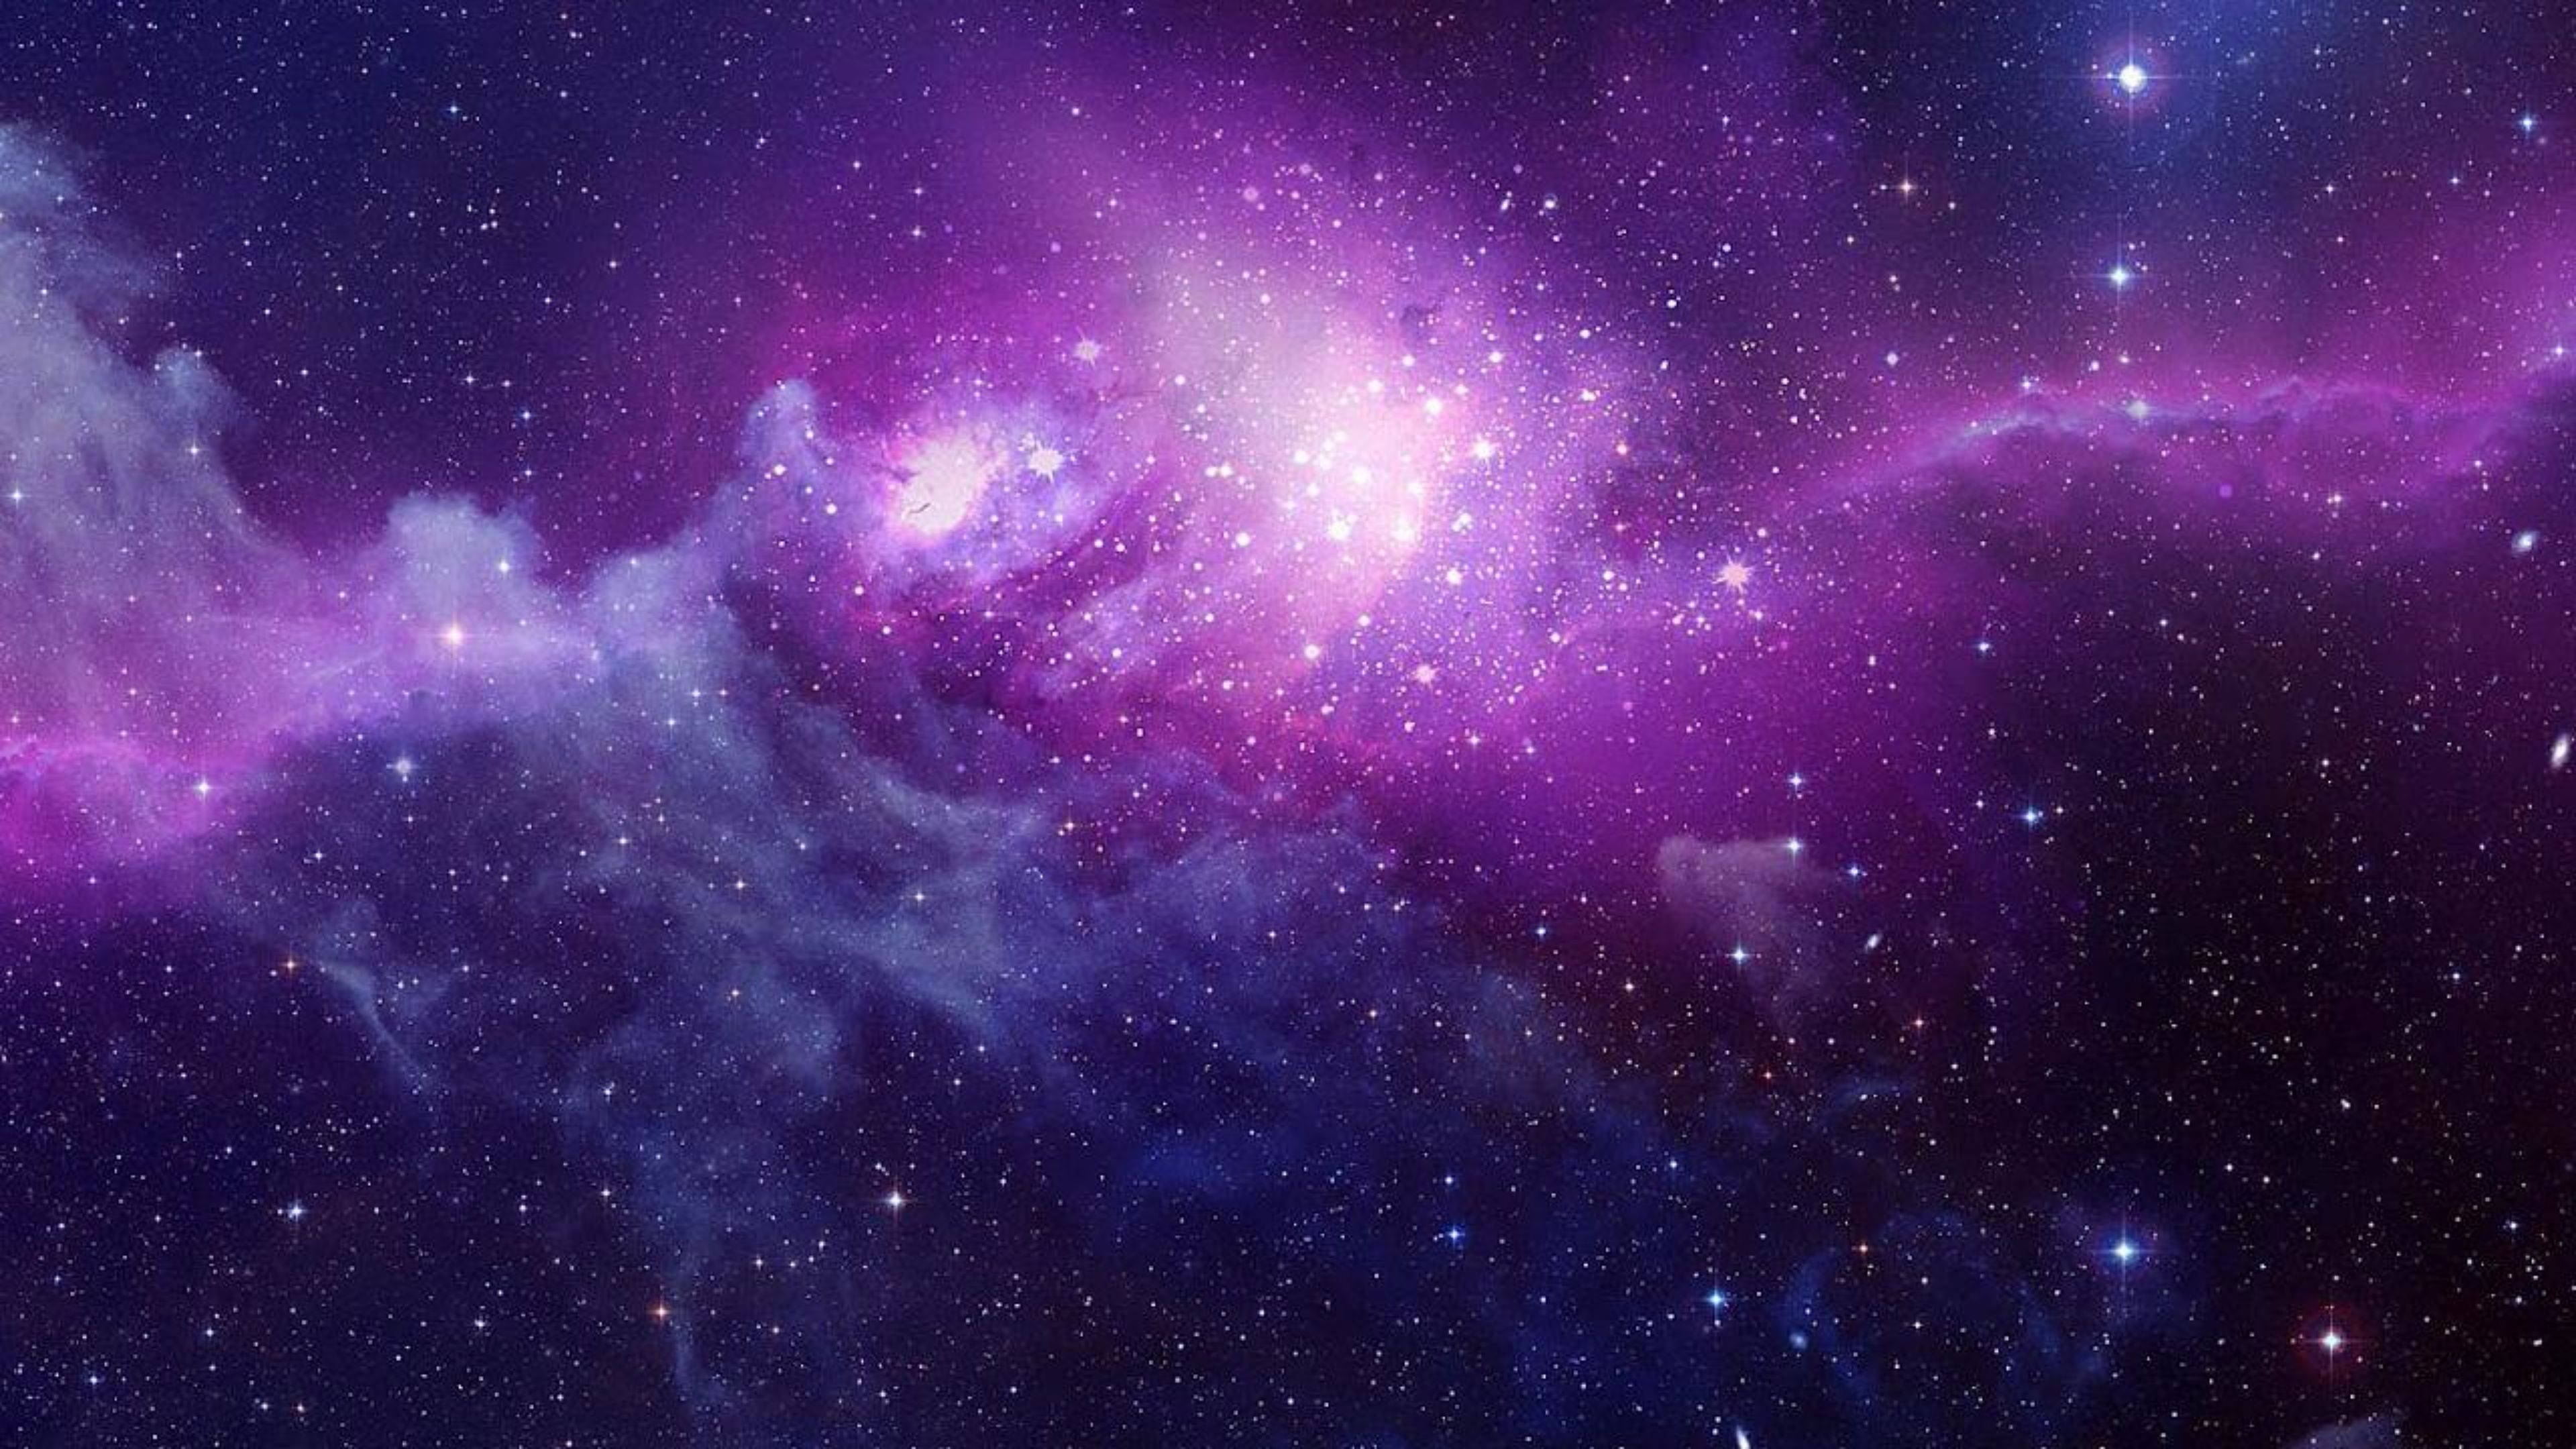  purple  wallpapers  photos and desktop backgrounds up to 8K  